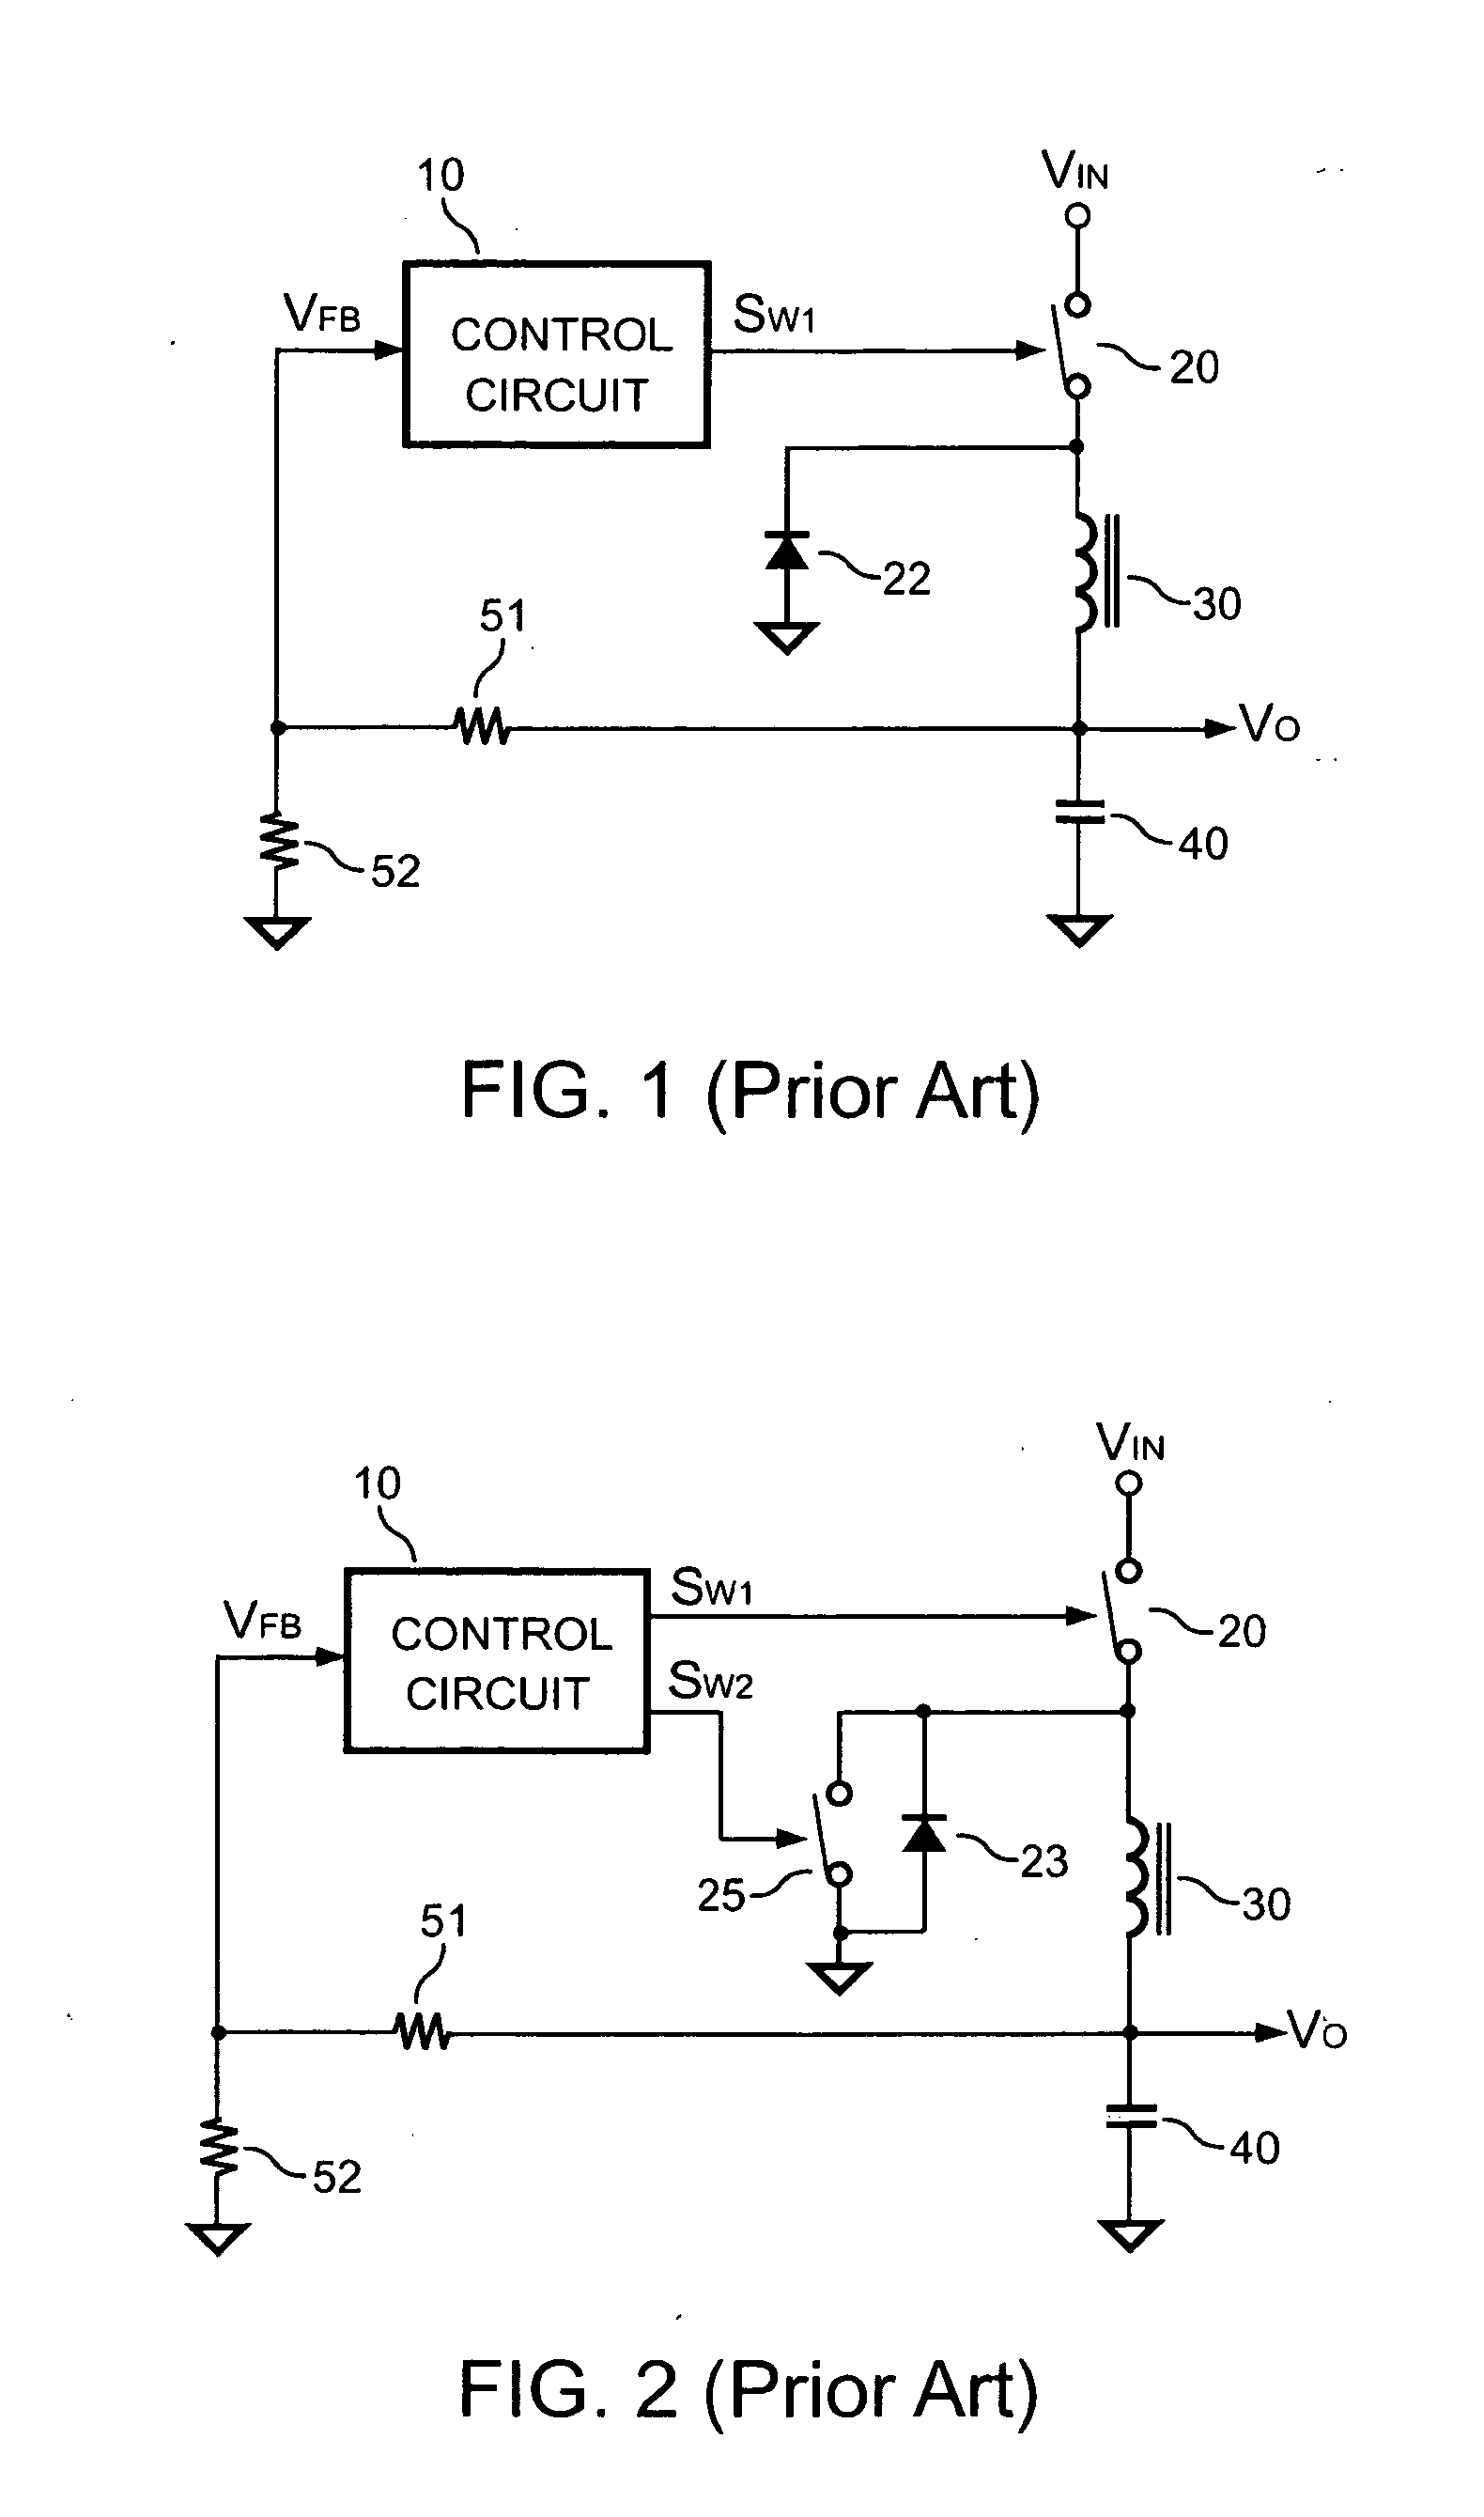 High efficiency buck converter for both full load and light load operations